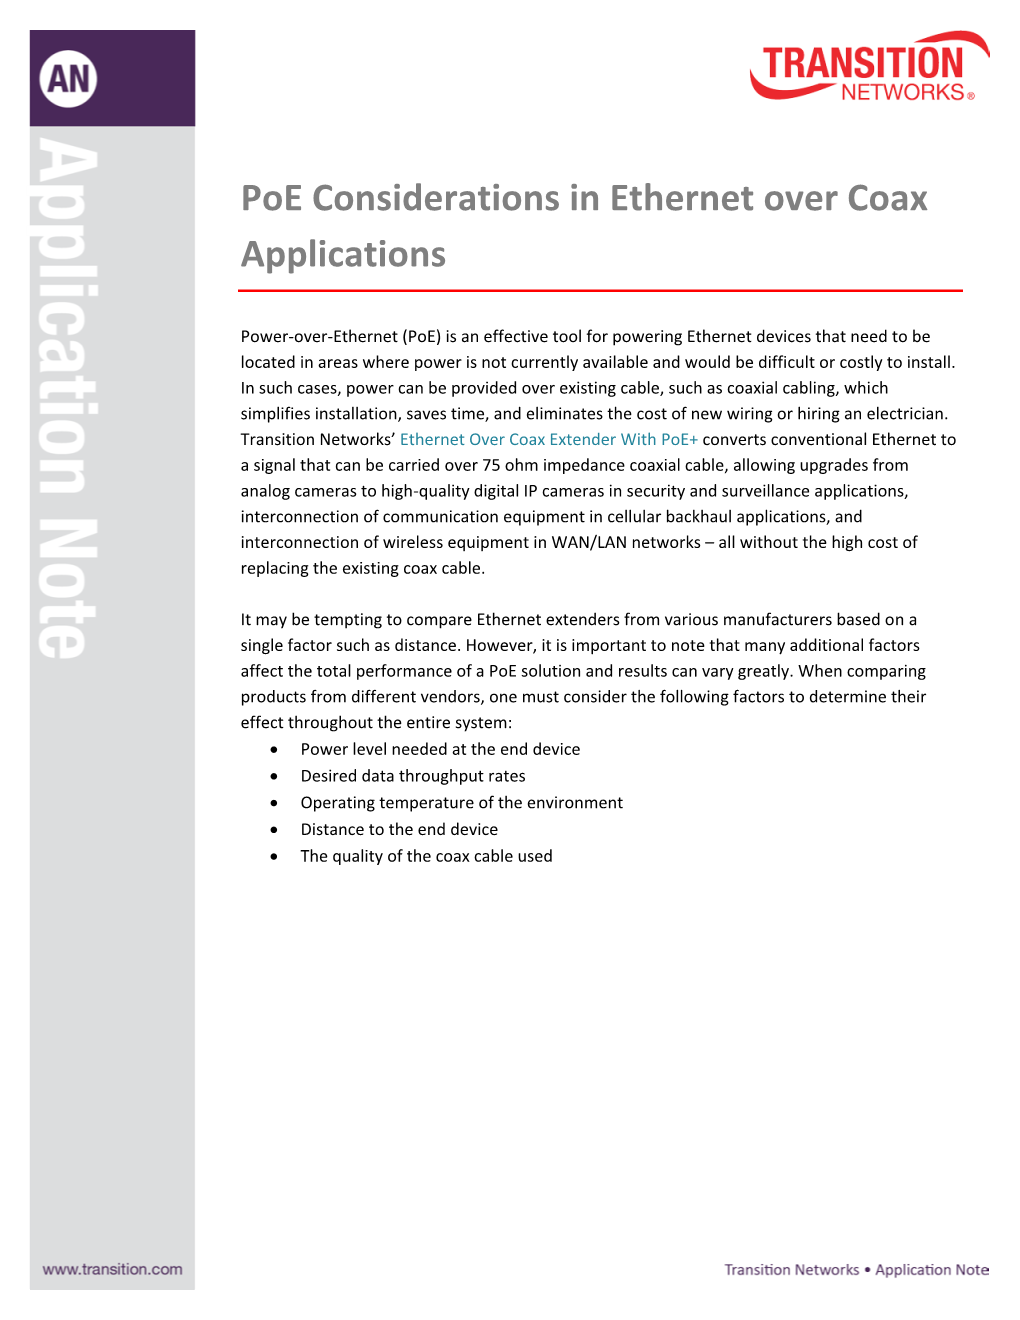 Poe Considerations in Ethernet Over Coax Applications